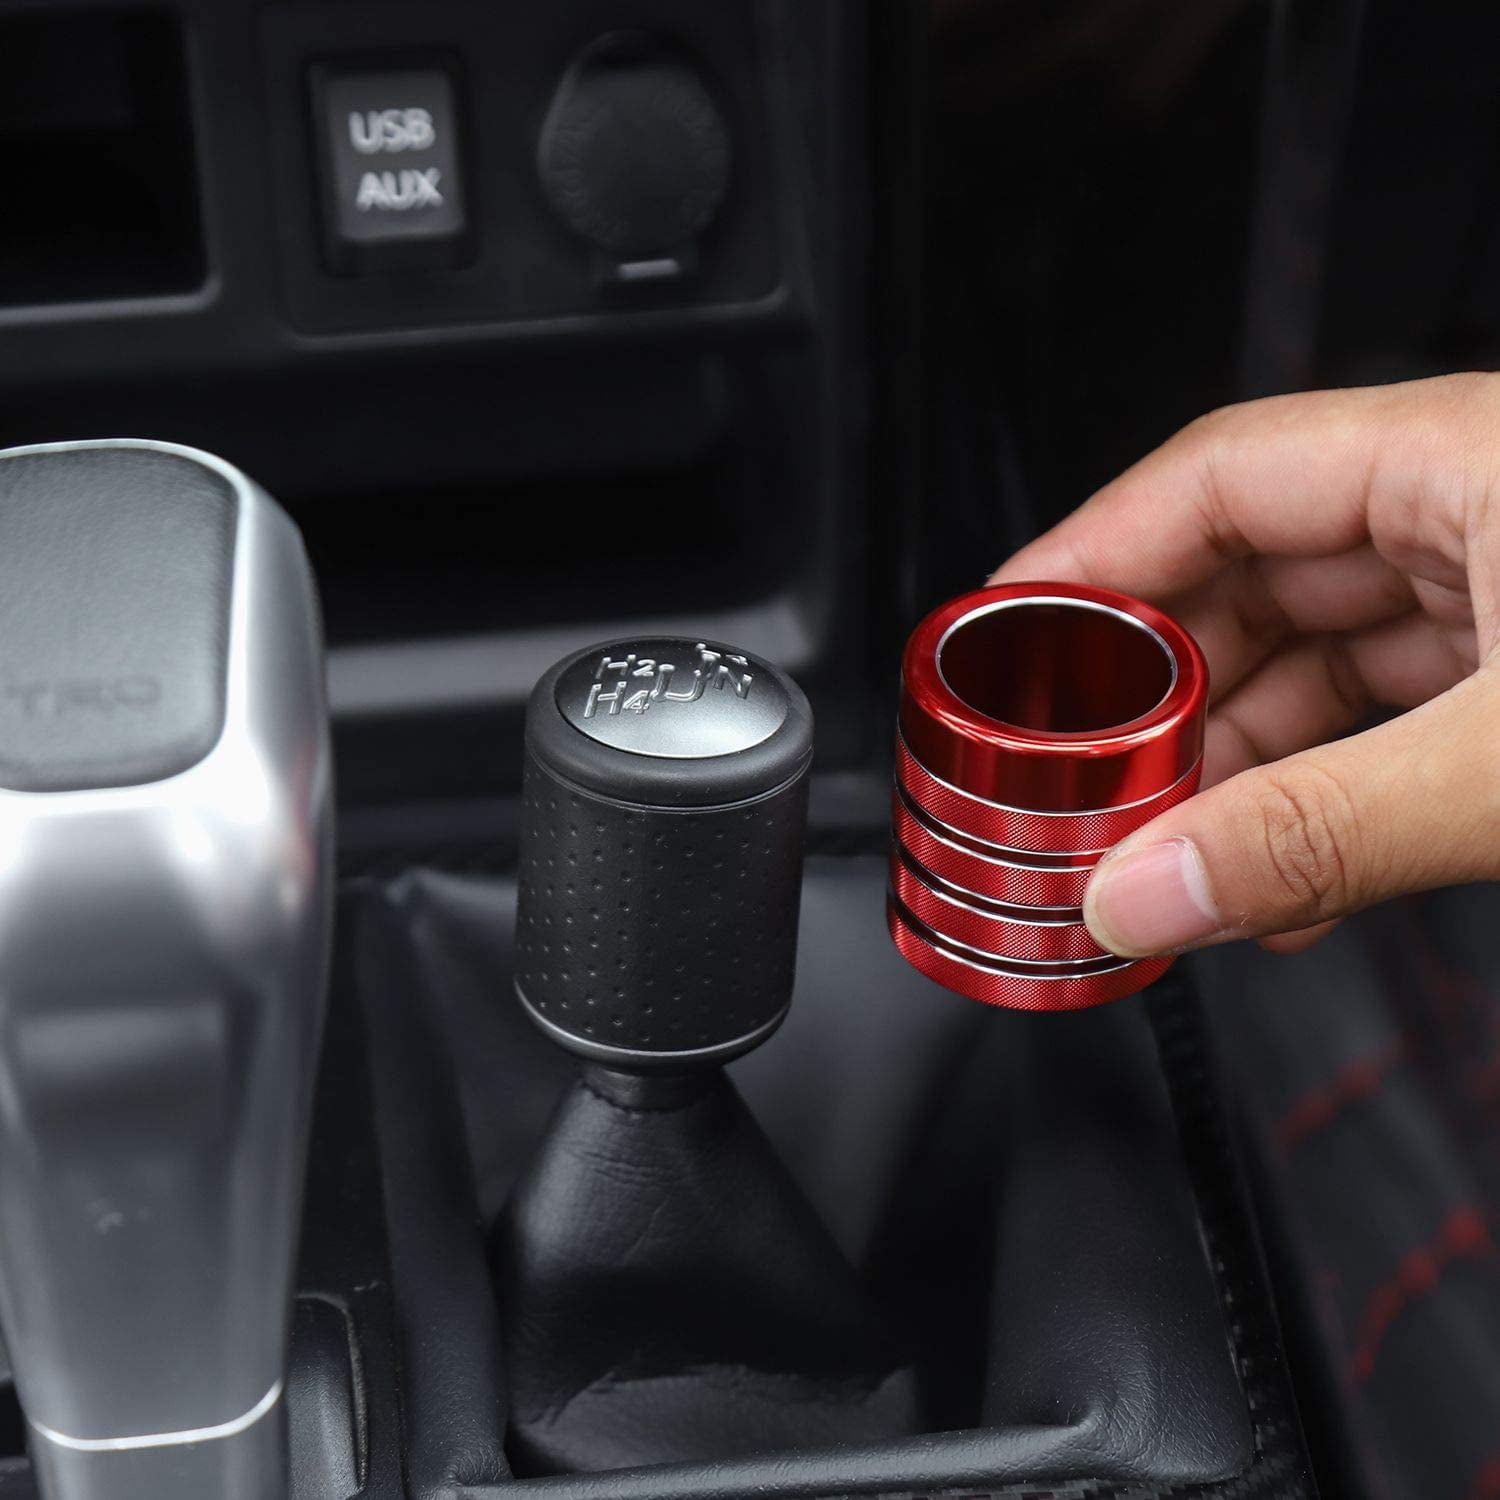 Red Four Wheel Drive Gear Shift Knob Cover Trim for 2010-2020 Toyota 4Runner TRD Pro Off-Road